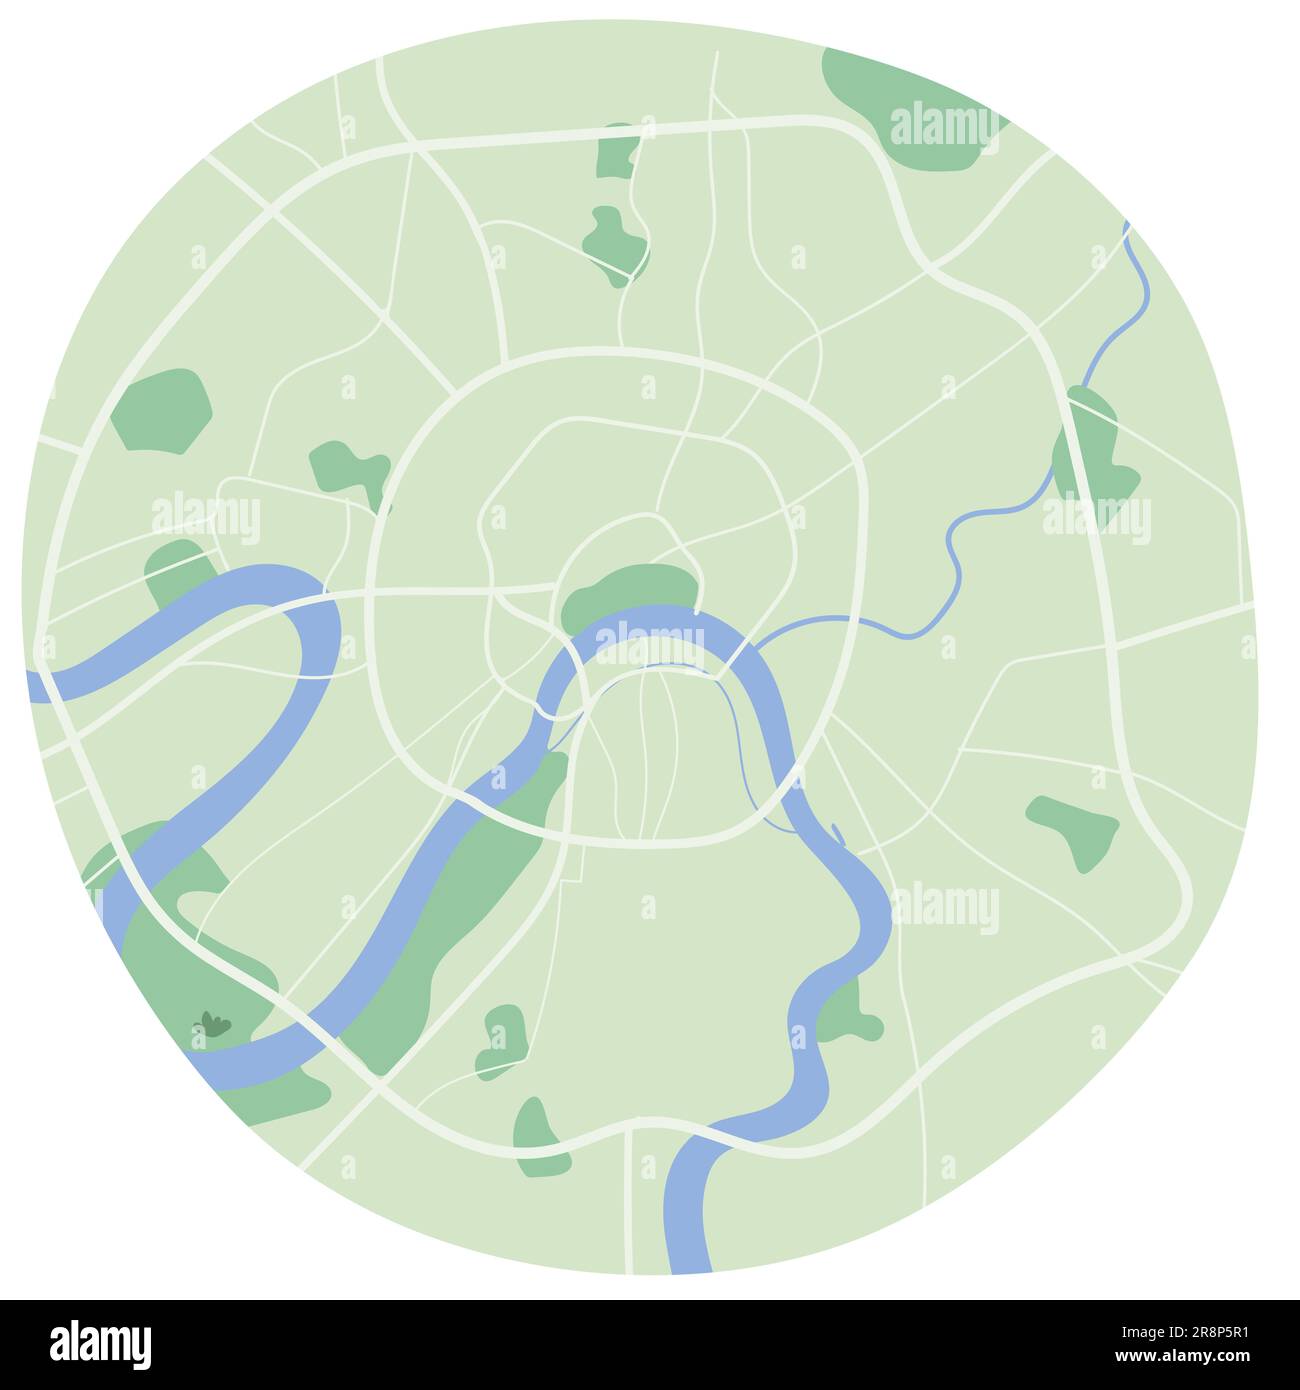 Moscow city center map with main roads and river in sketch style. Simple plan vector illustration Stock Vector